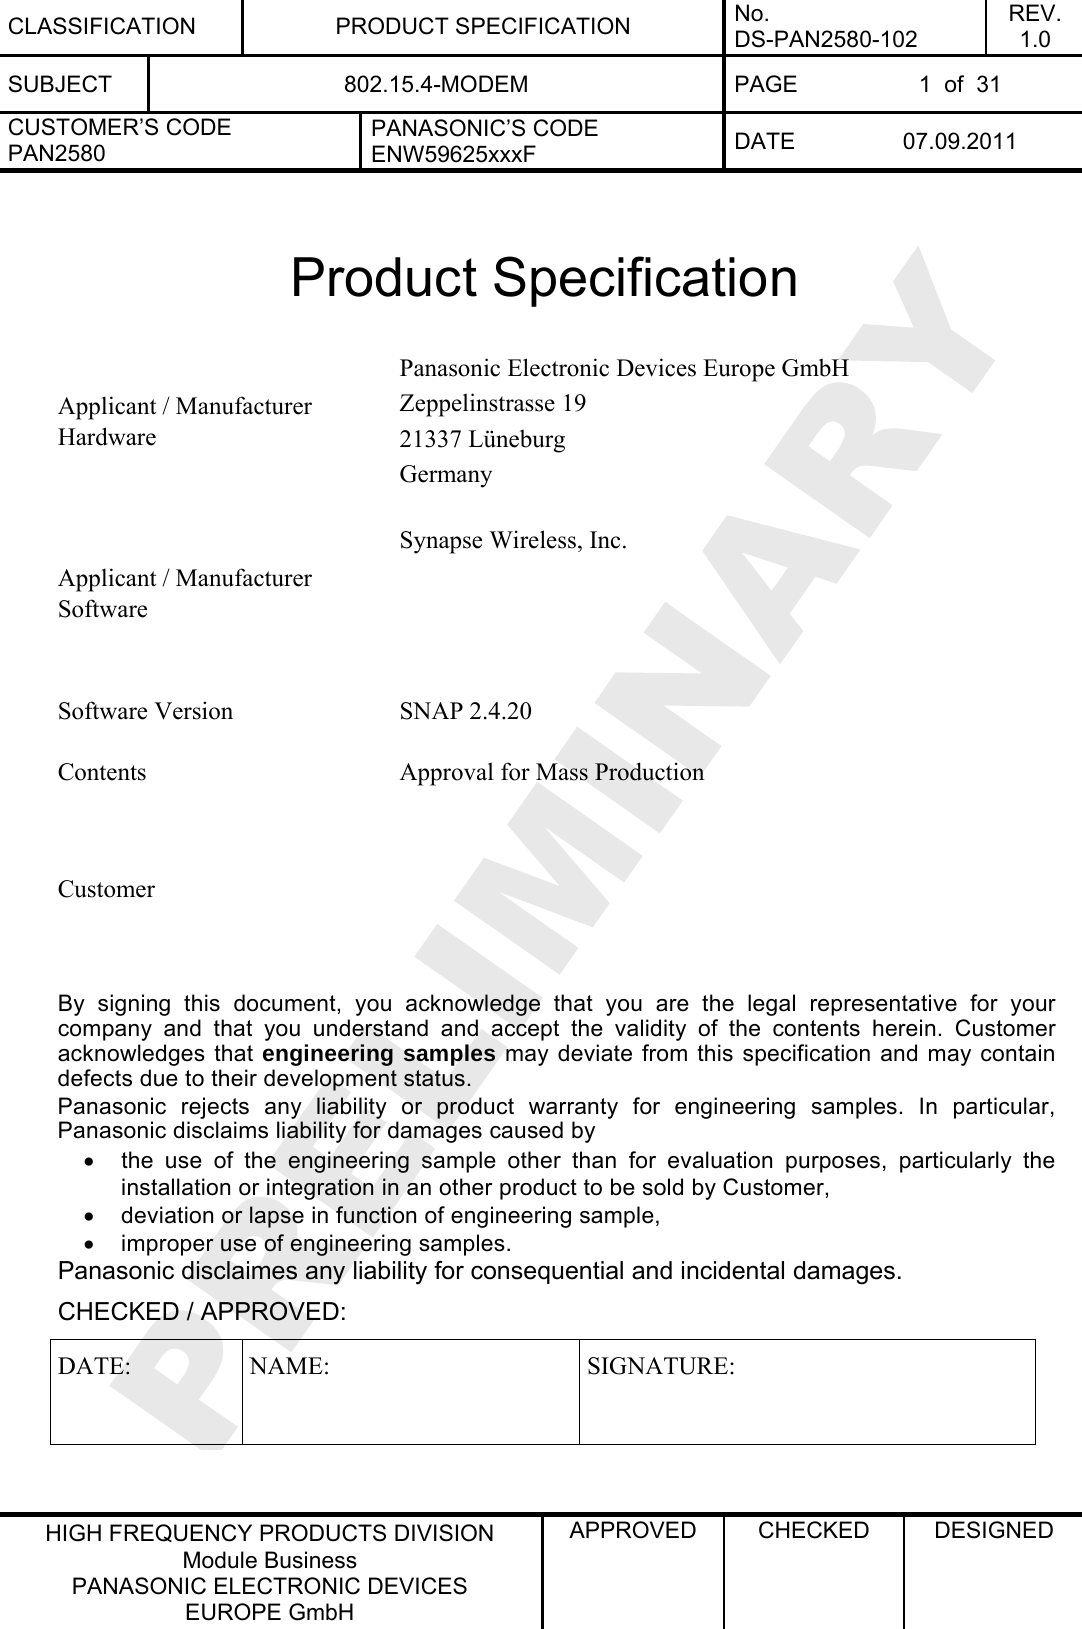 CLASSIFICATION PRODUCT SPECIFICATION No. DS-PAN2580-102 REV. 1.0 SUBJECT  802.15.4-MODEM  PAGE  1  of  31 CUSTOMER’S CODE PAN2580 PANASONIC’S CODE ENW59625xxxF  DATE 07.09.2011   HIGH FREQUENCY PRODUCTS DIVISION Module Business PANASONIC ELECTRONIC DEVICES  EUROPE GmbH APPROVED  CHECKED  DESIGNED    Product Specification  Panasonic Electronic Devices Europe GmbH Zeppelinstrasse 19 21337 Lüneburg Applicant / Manufacturer Hardware Germany   Synapse Wireless, Inc.    Applicant / Manufacturer Software    Software Version  SNAP 2.4.20   Contents  Approval for Mass Production      Customer    By signing this document, you acknowledge that you are the legal representative for your company and that you understand and accept the validity of the contents herein. Customer acknowledges that engineering samples may deviate from this specification and may contain defects due to their development status. Panasonic rejects any liability or product warranty for engineering samples. In particular, Panasonic disclaims liability for damages caused by •  the use of the engineering sample other than for evaluation purposes, particularly the installation or integration in an other product to be sold by Customer, •  deviation or lapse in function of engineering sample, •  improper use of engineering samples. Panasonic disclaimes any liability for consequential and incidental damages. CHECKED / APPROVED: DATE: NAME:  SIGNATURE:  